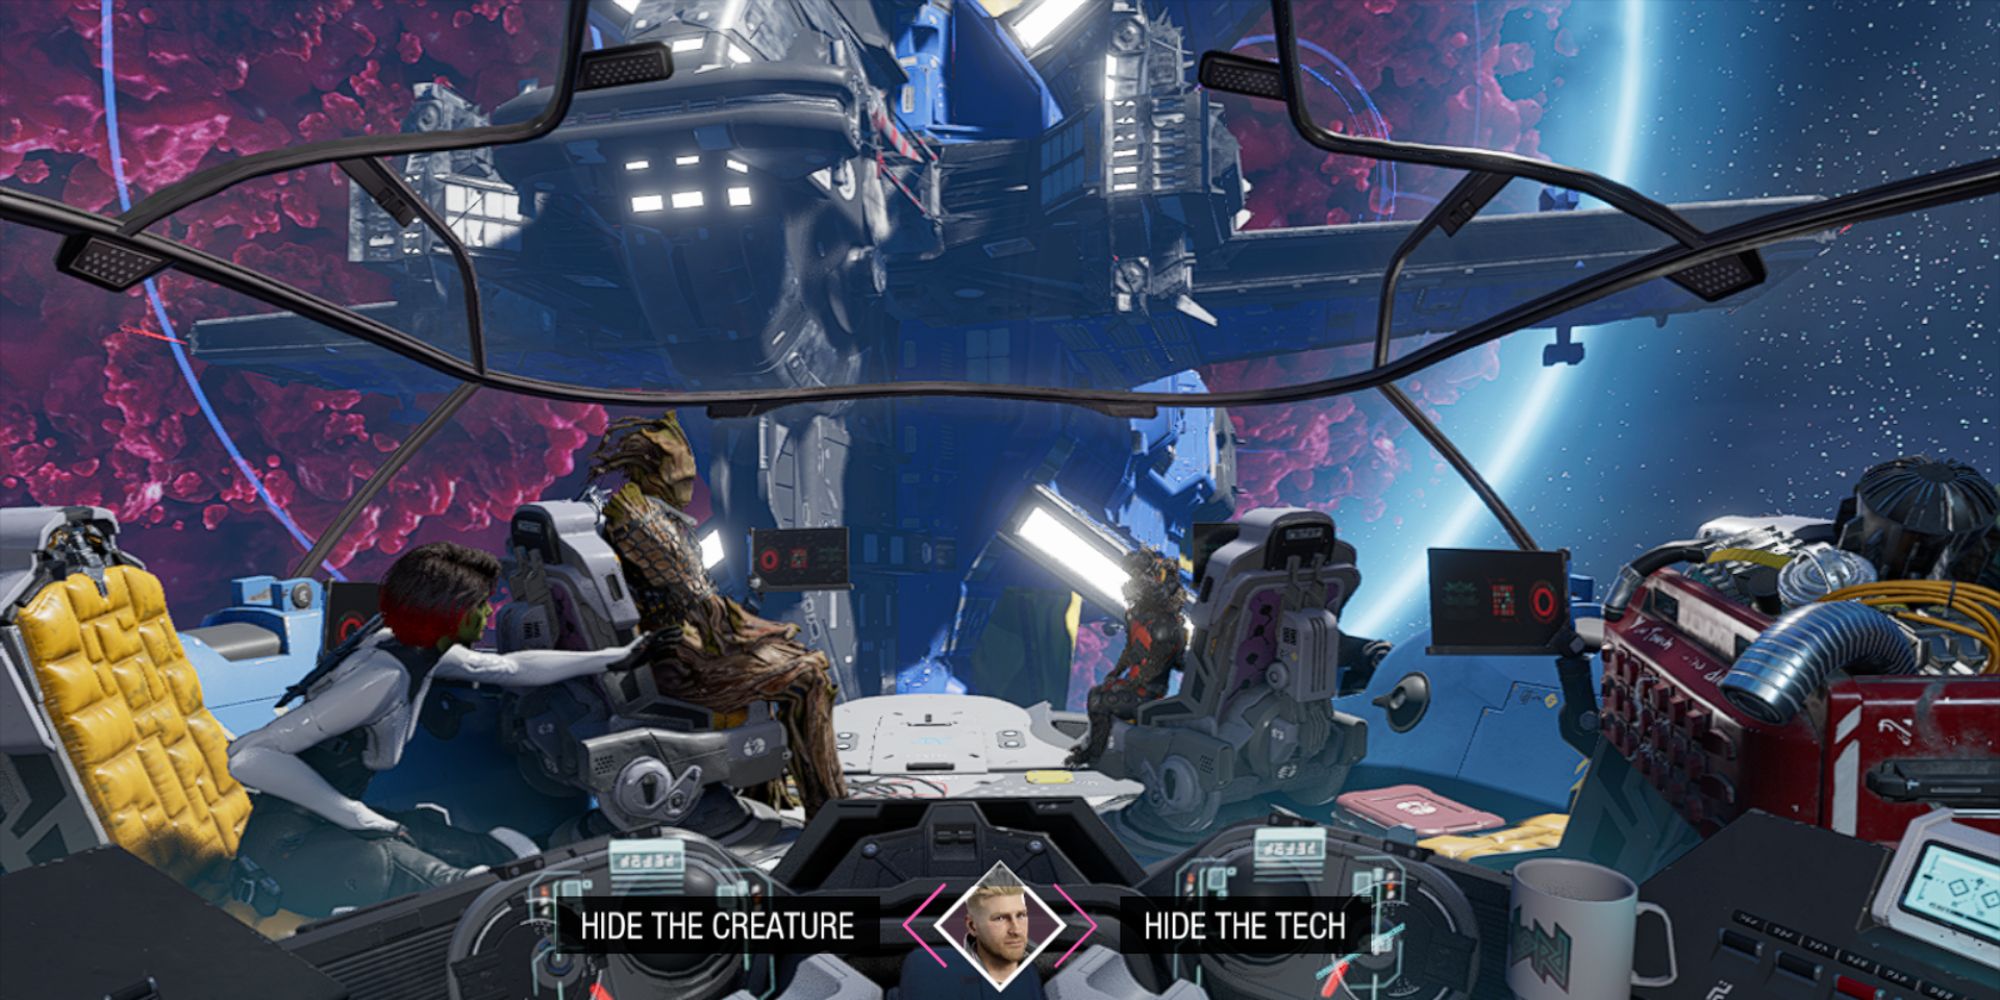 Marvel's Guardians of the Galaxy Screenshot Of Hide The Creature Or Tech Choice